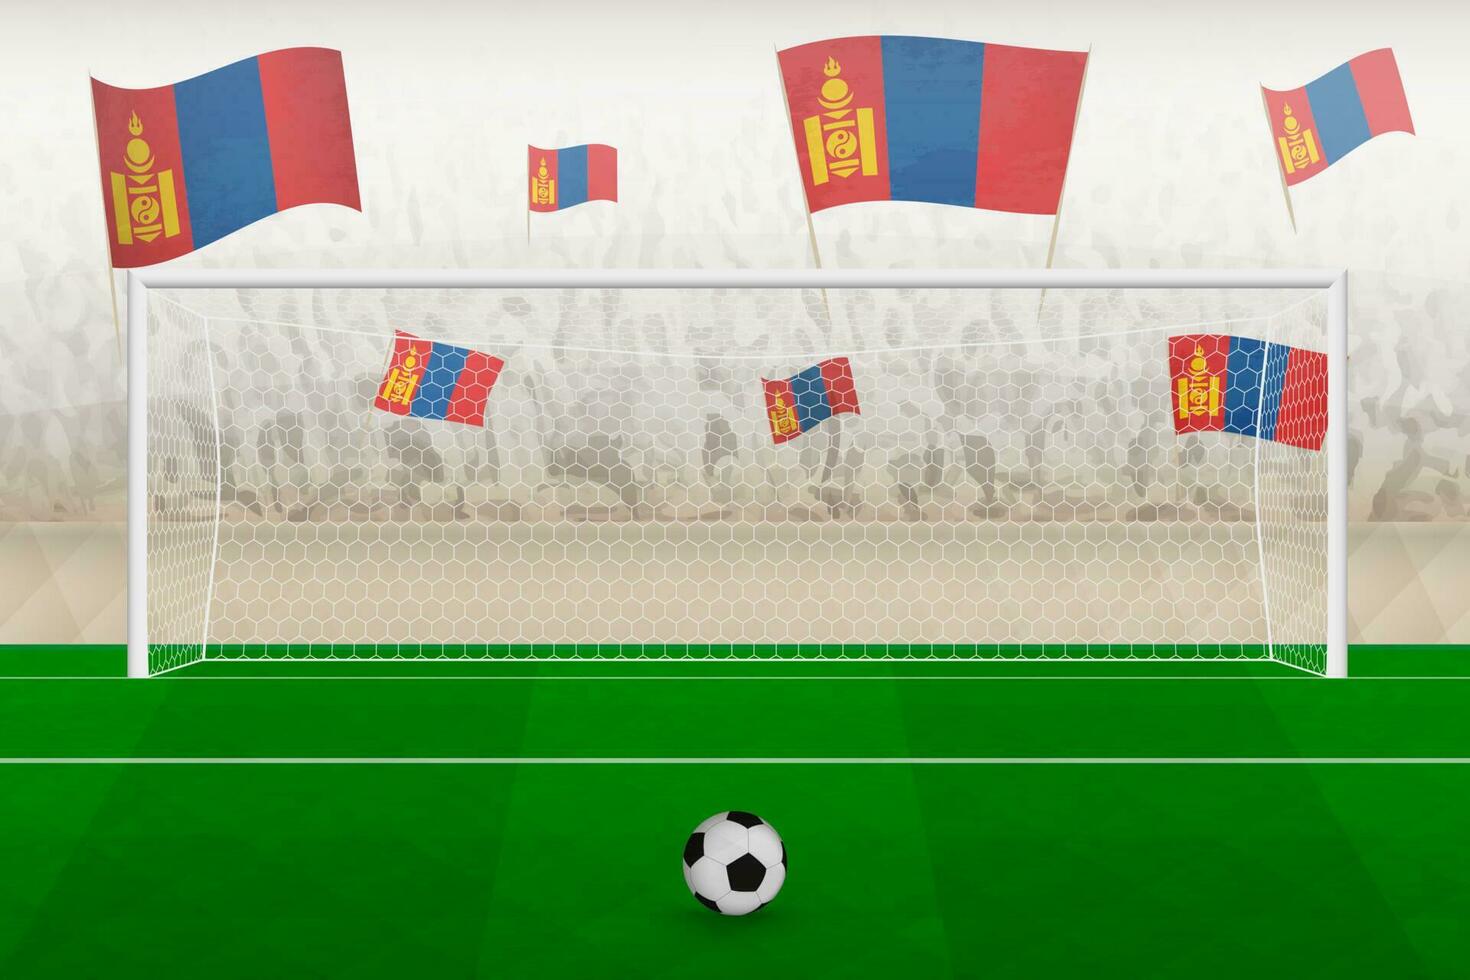 Mongolia football team fans with flags of Mongolia cheering on stadium, penalty kick concept in a soccer match. vector